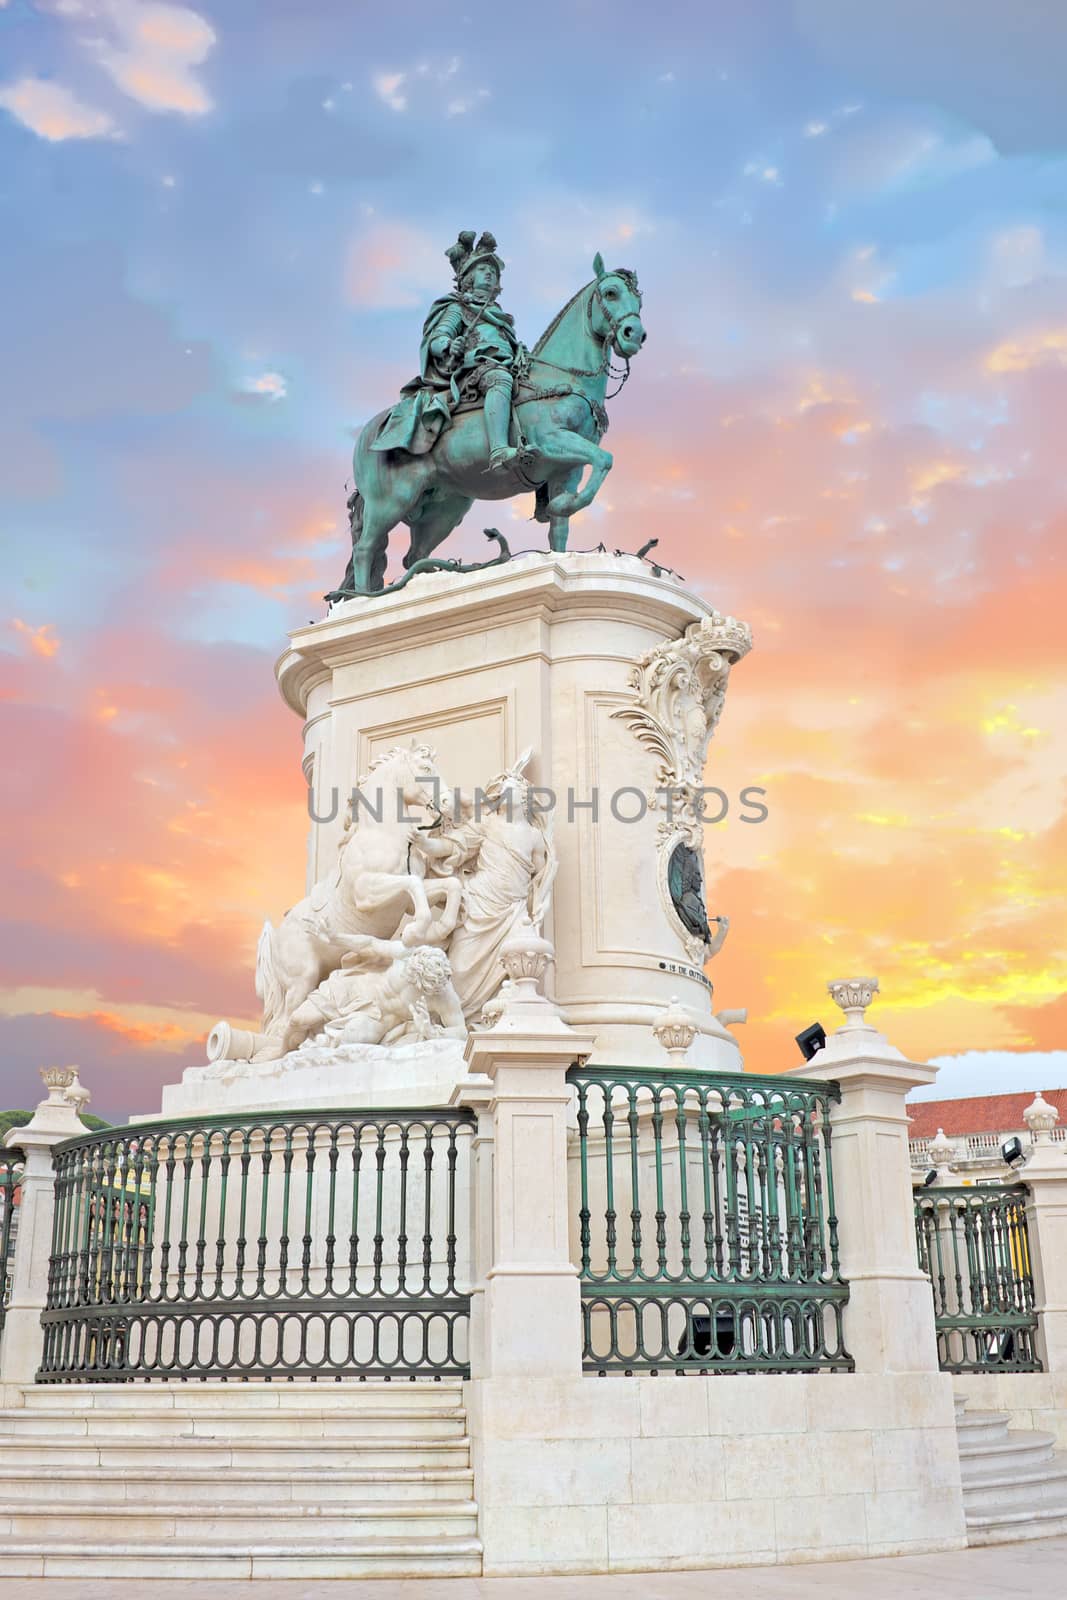 Praca do Comercio and Statue of King Jose I in Lisbon, Portugal  by devy